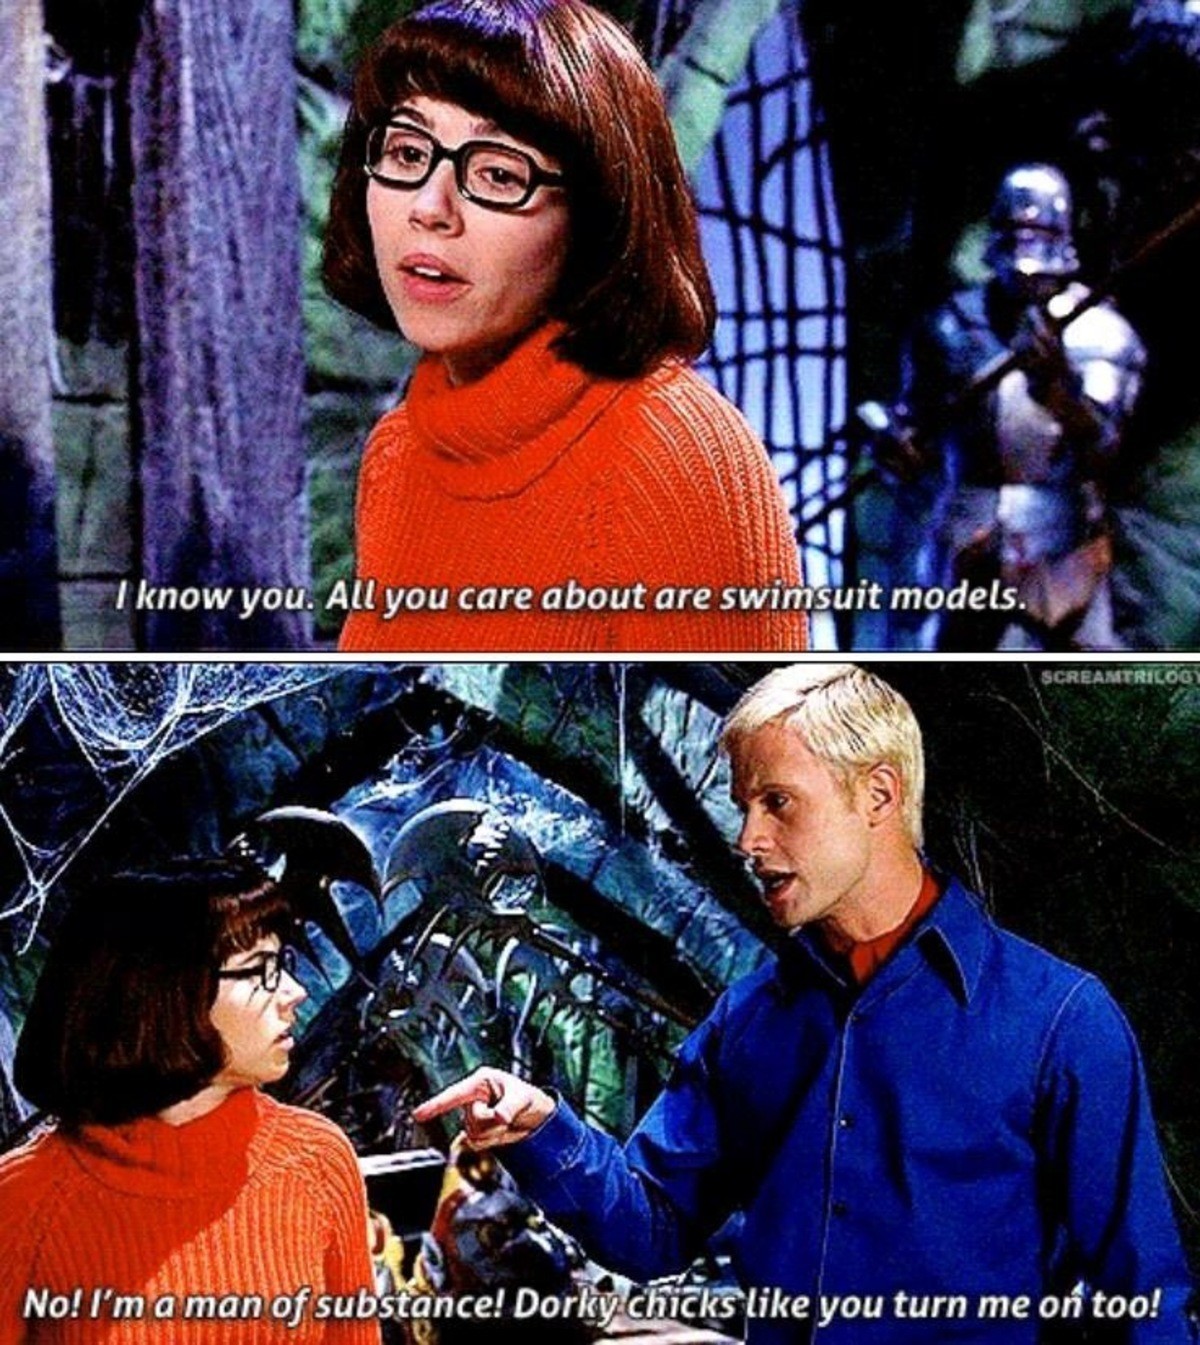 Why the live action Scooby-Doo movies were amazing